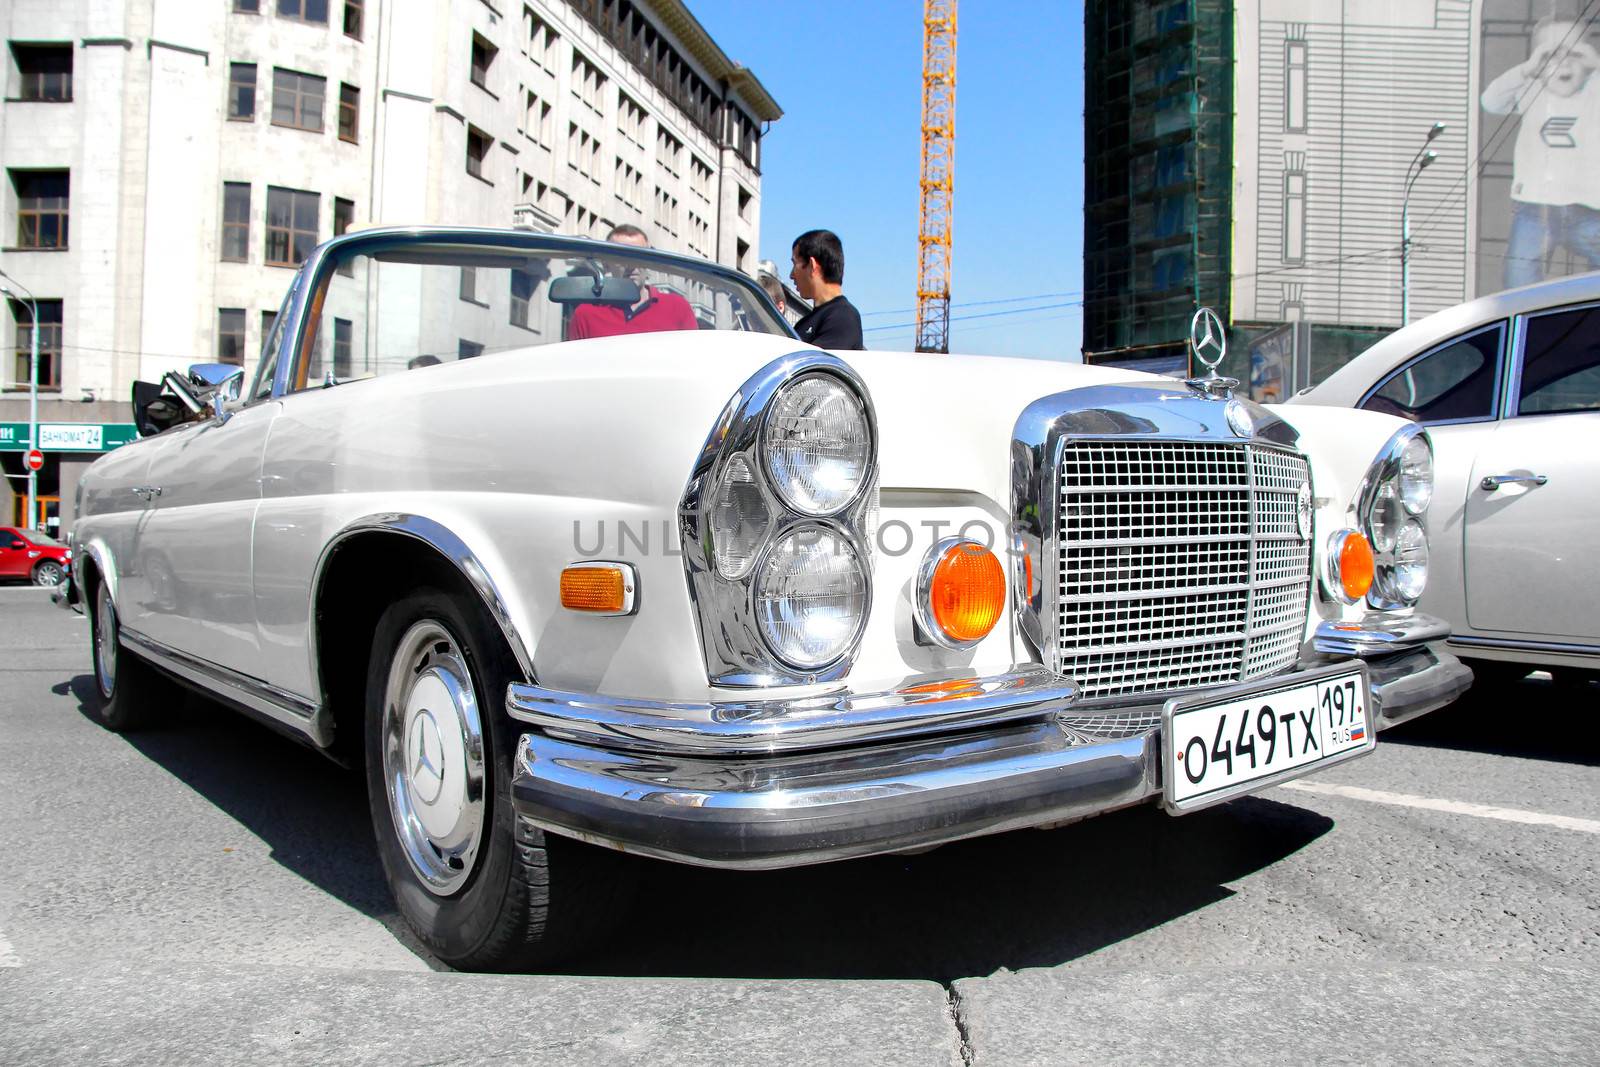 MOSCOW, RUSSIA - JUNE 2: German motor car Mercedes-Benz W111 S-class competes at the annual L.U.C. Chopard Classic Weekend Rally on June 2, 2013 in Moscow, Russia.